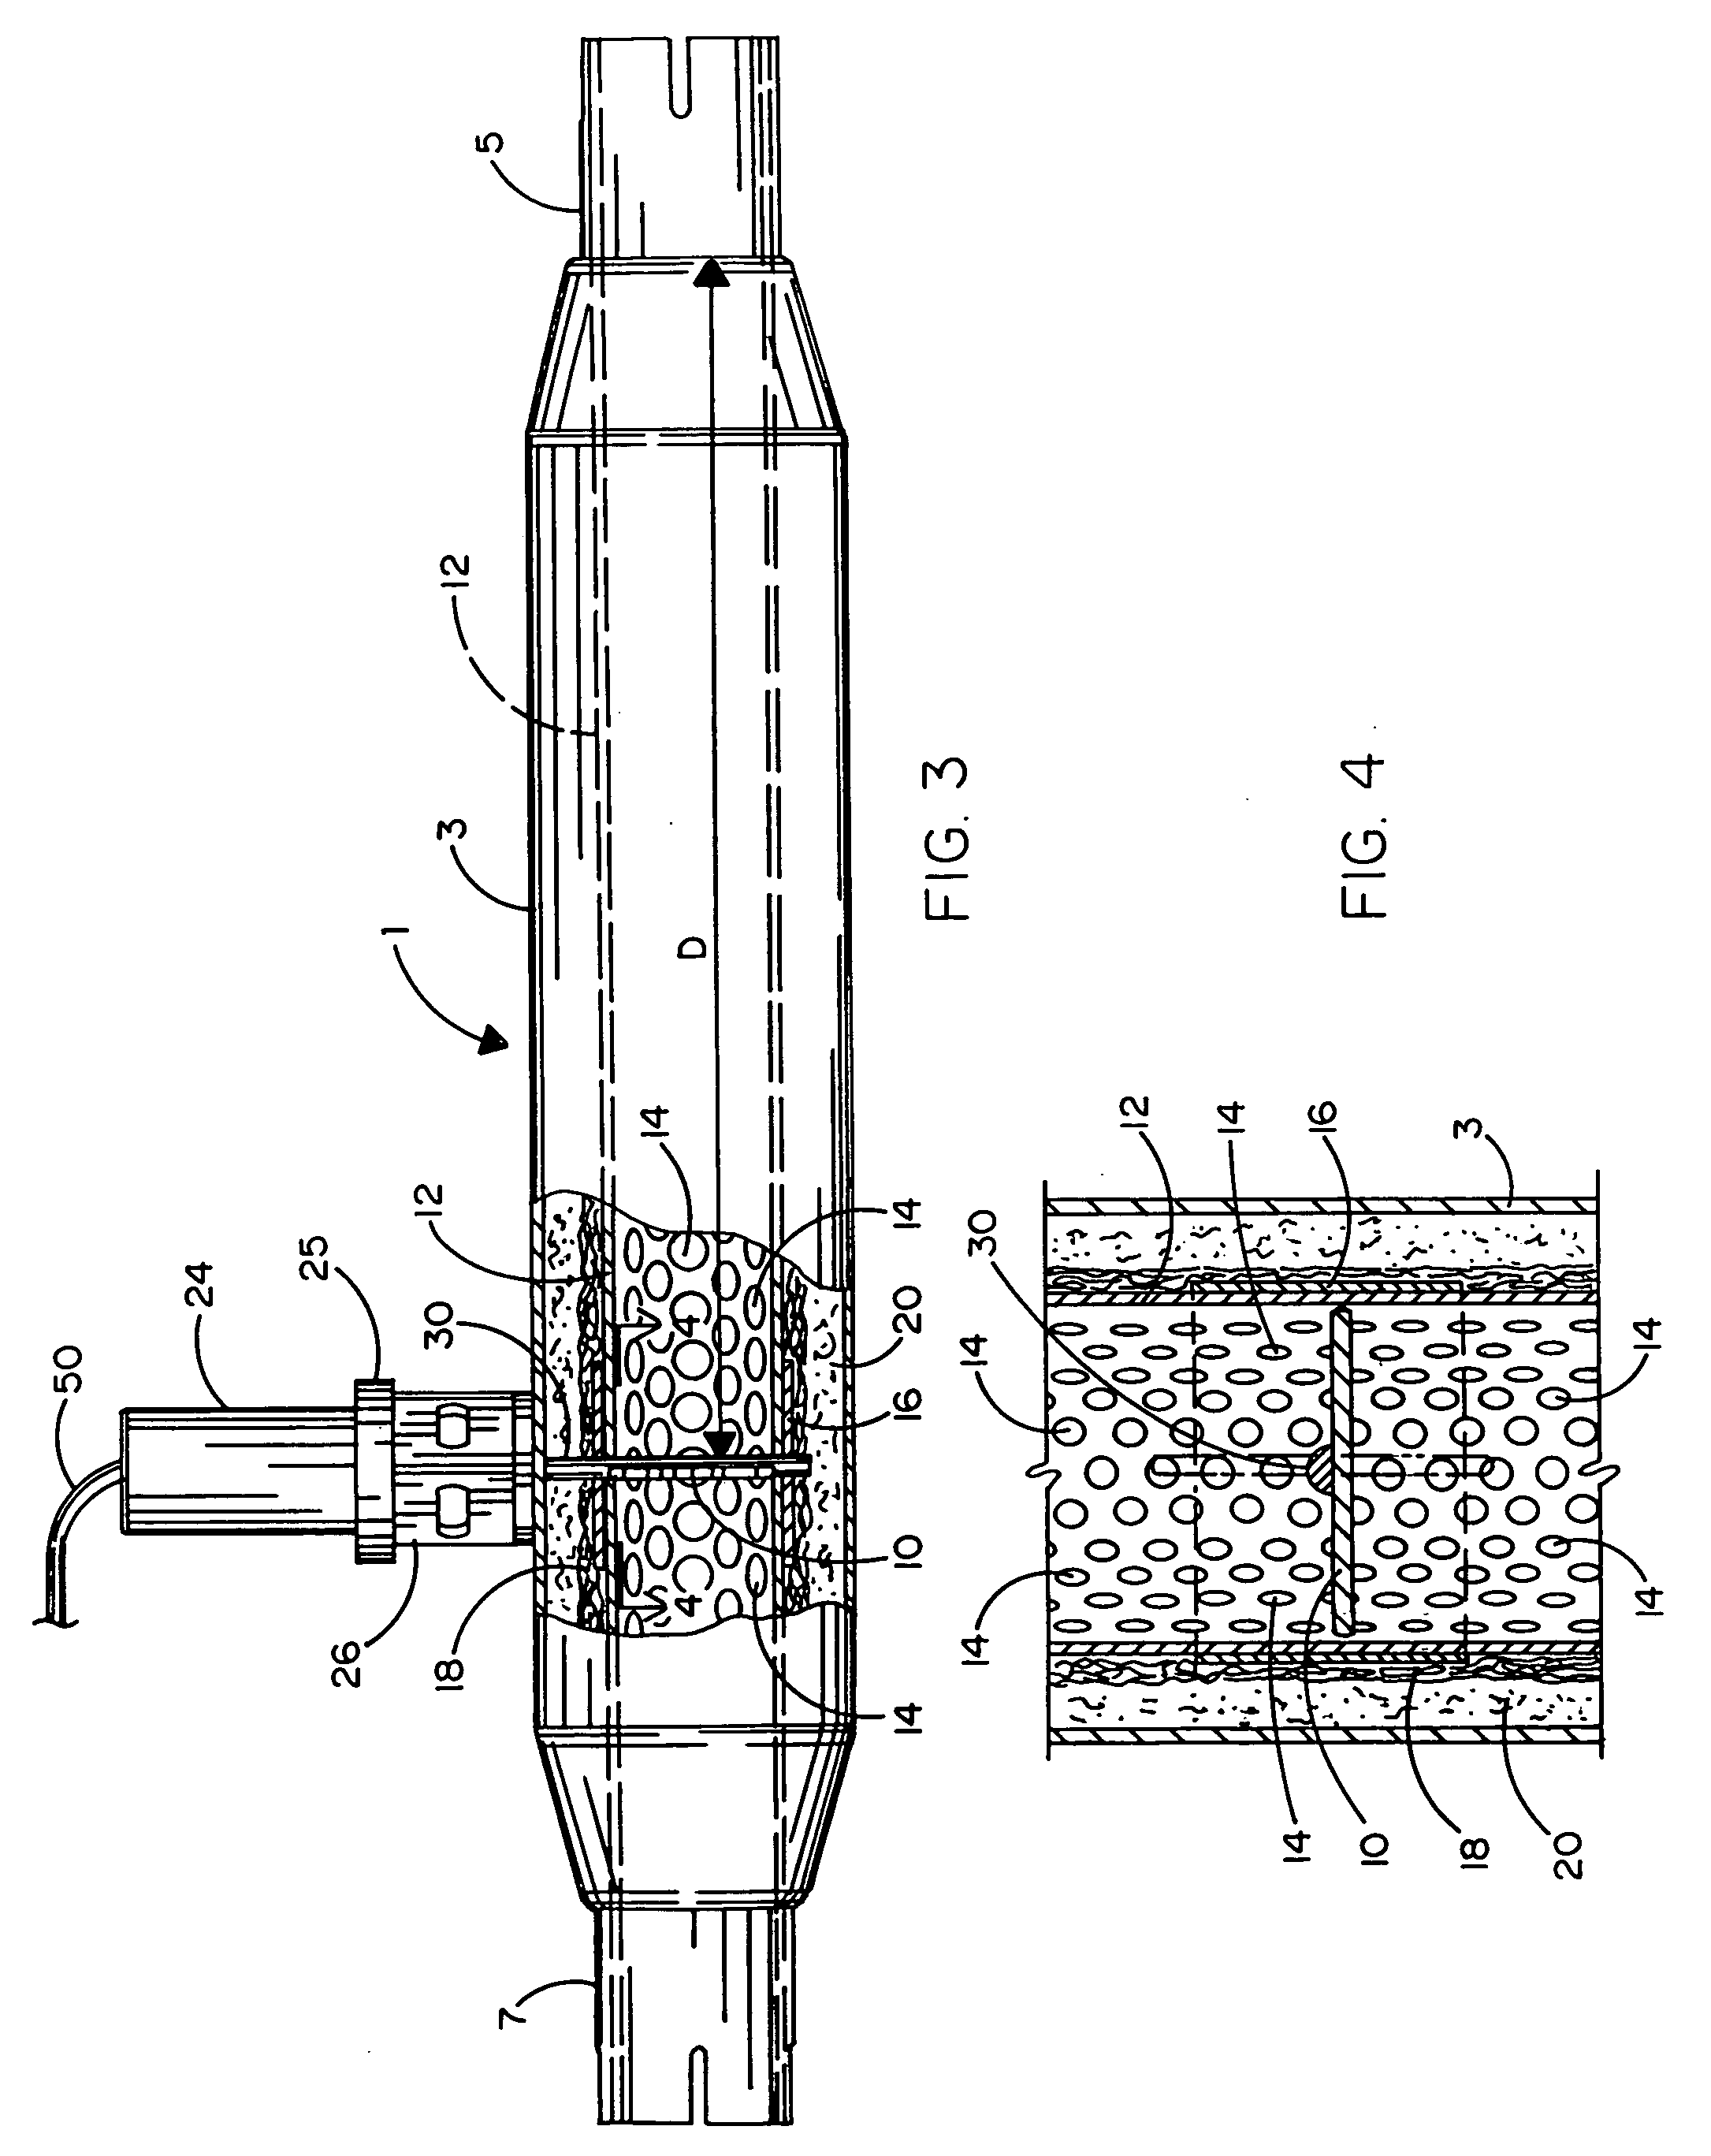 Muffler having adjustable butterfly valve for improved sound attenuation and engine performance